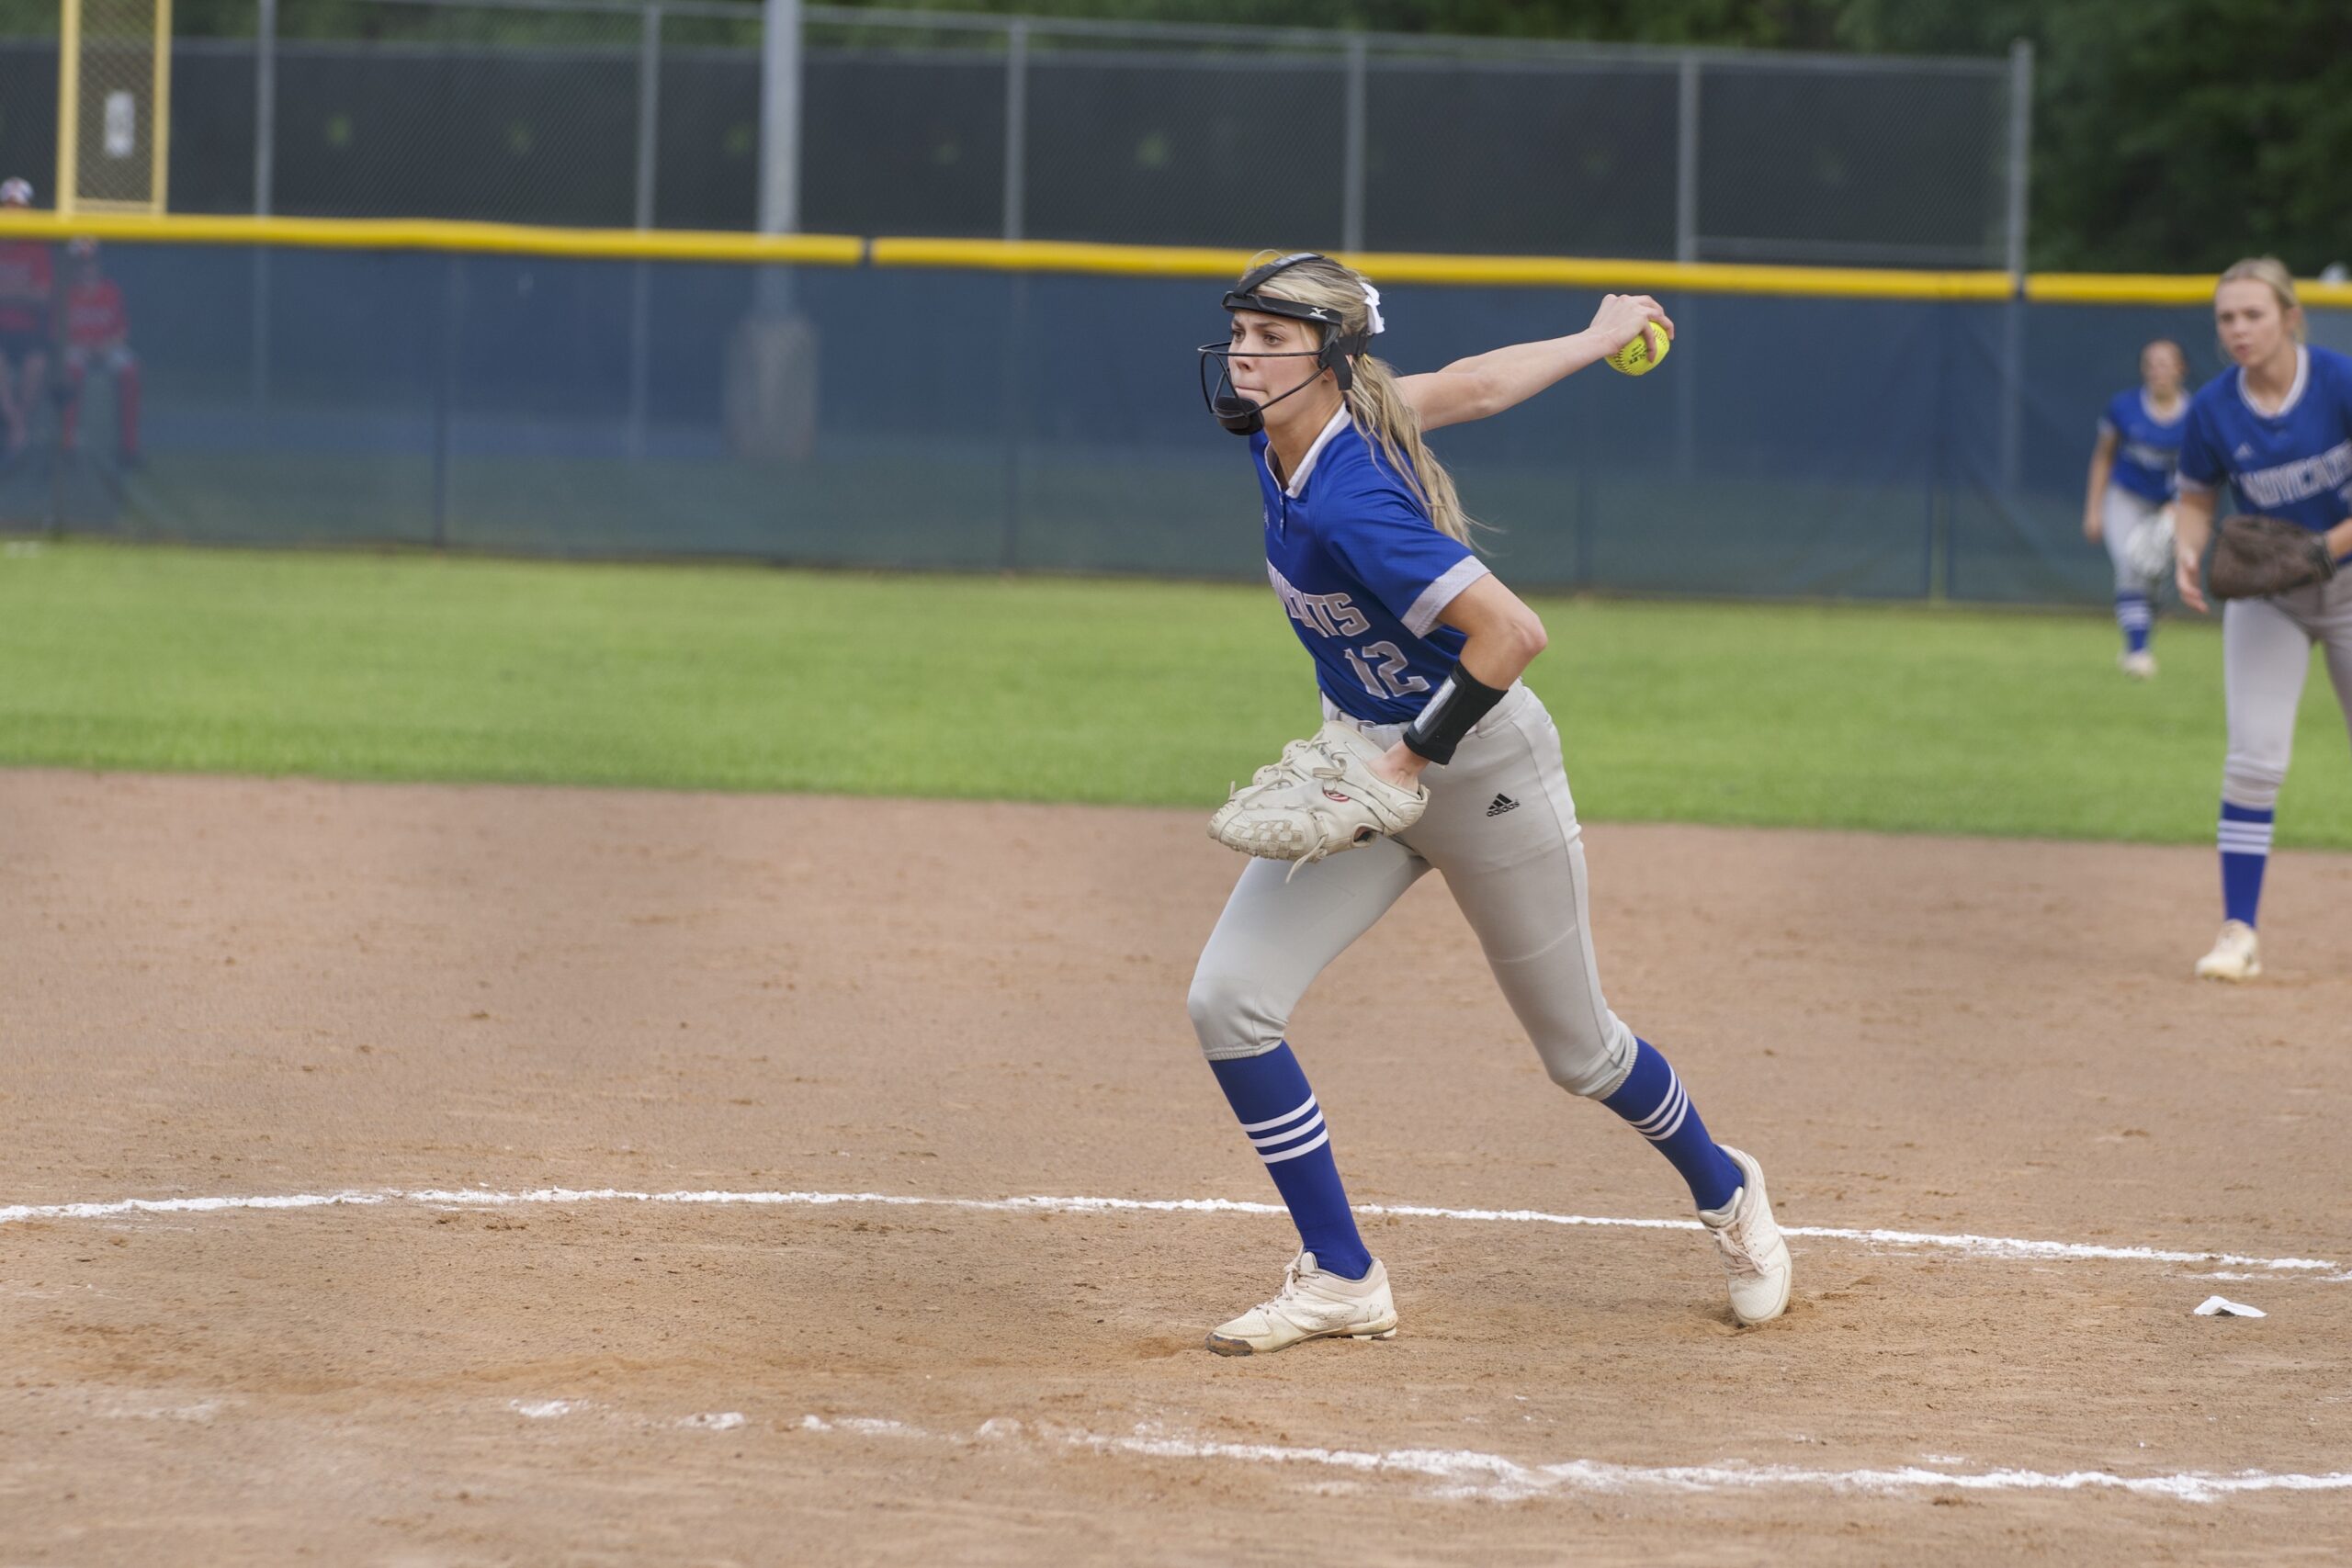 Lady Cats finish undefeated in district play